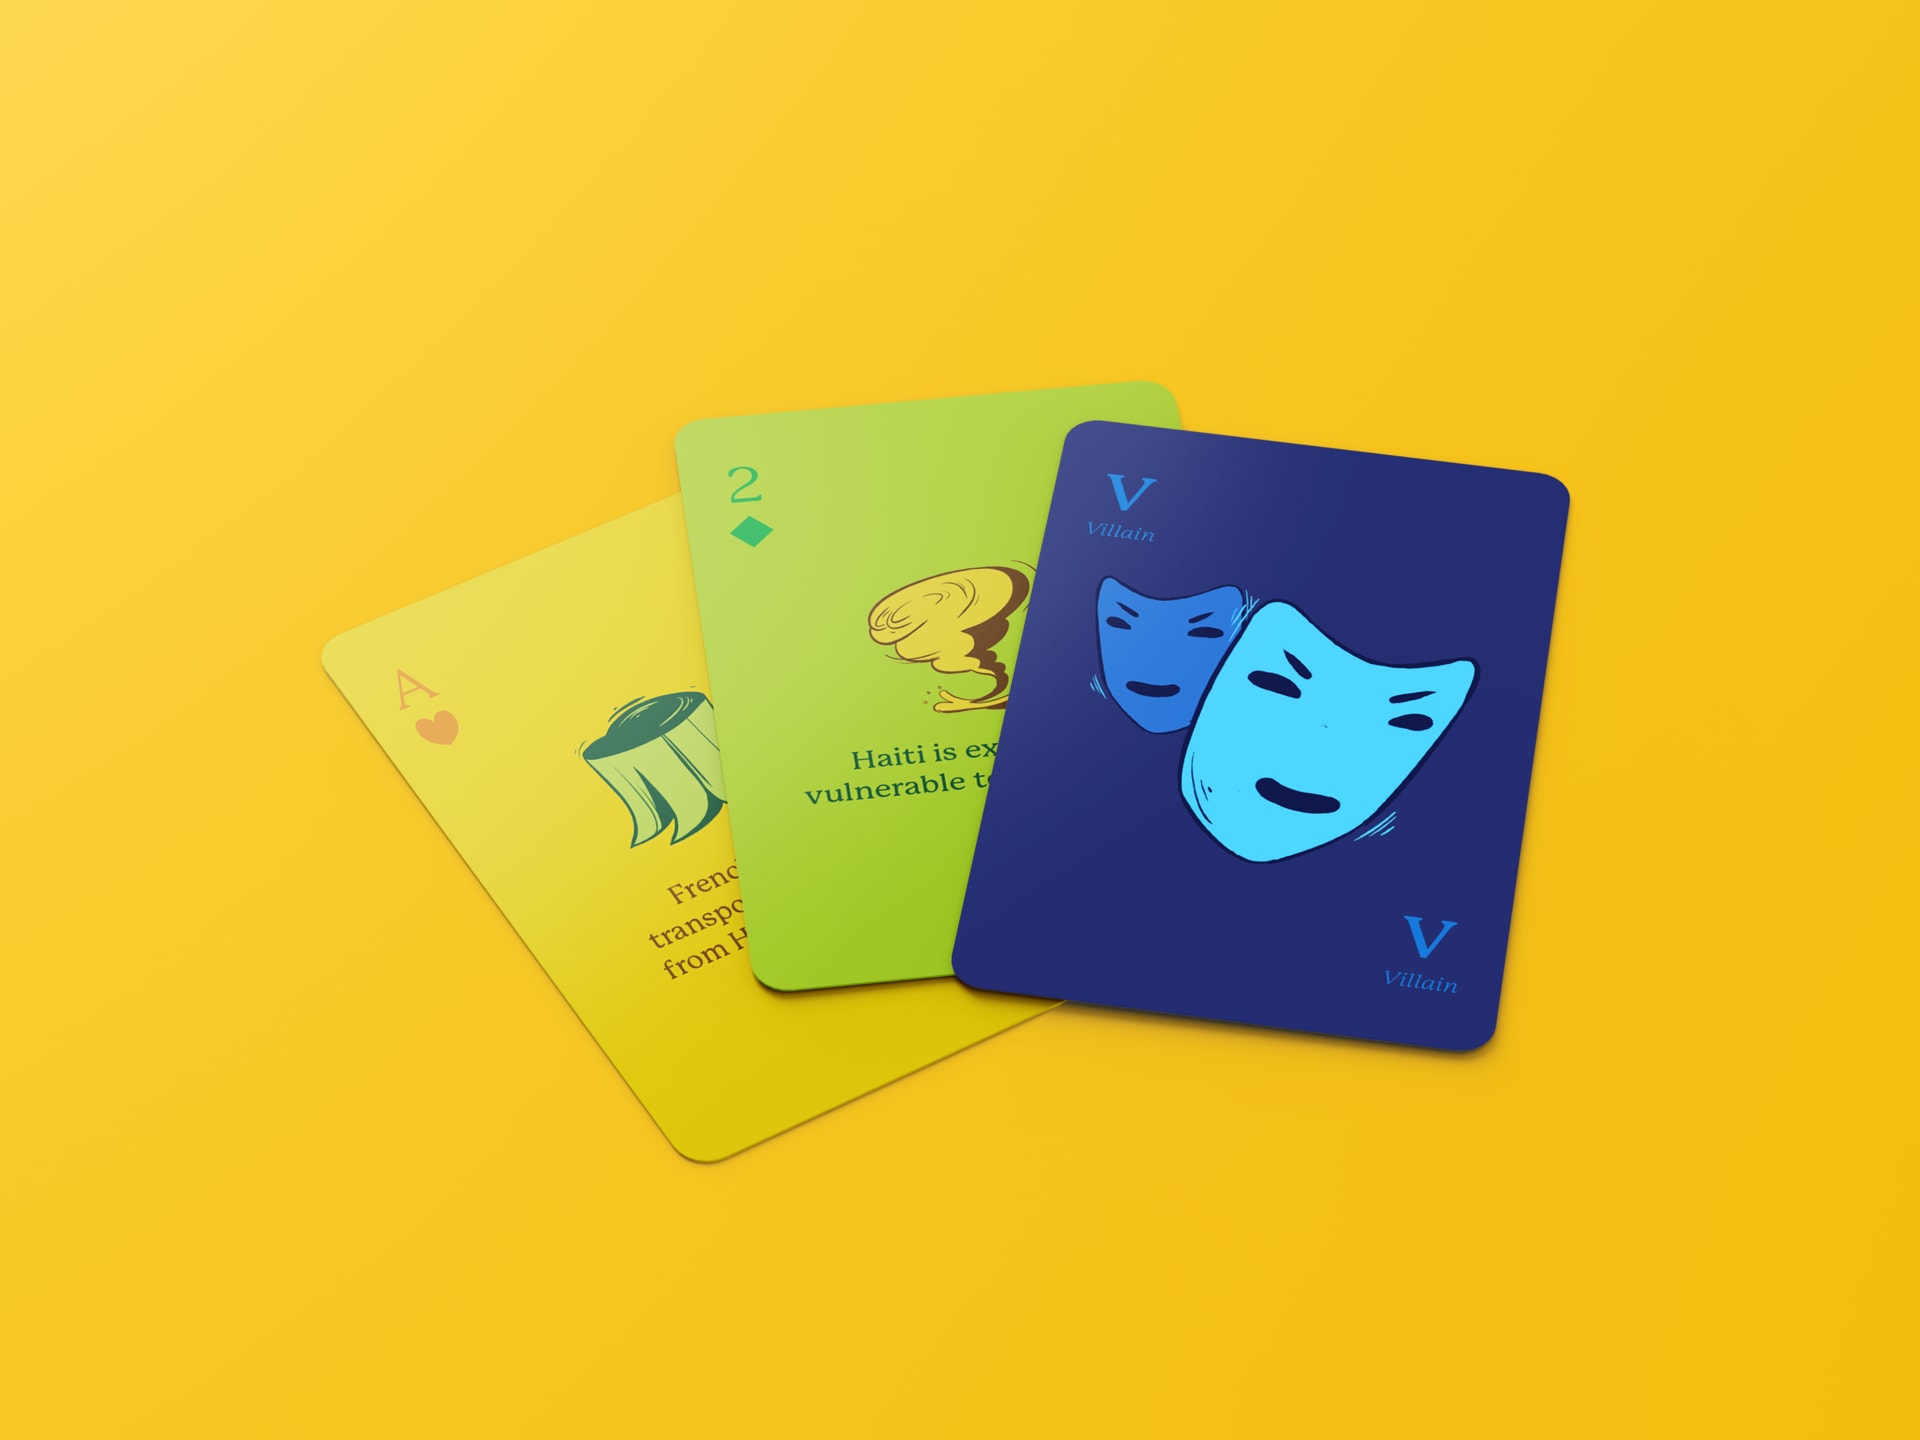 An image of the cards on a yellow background